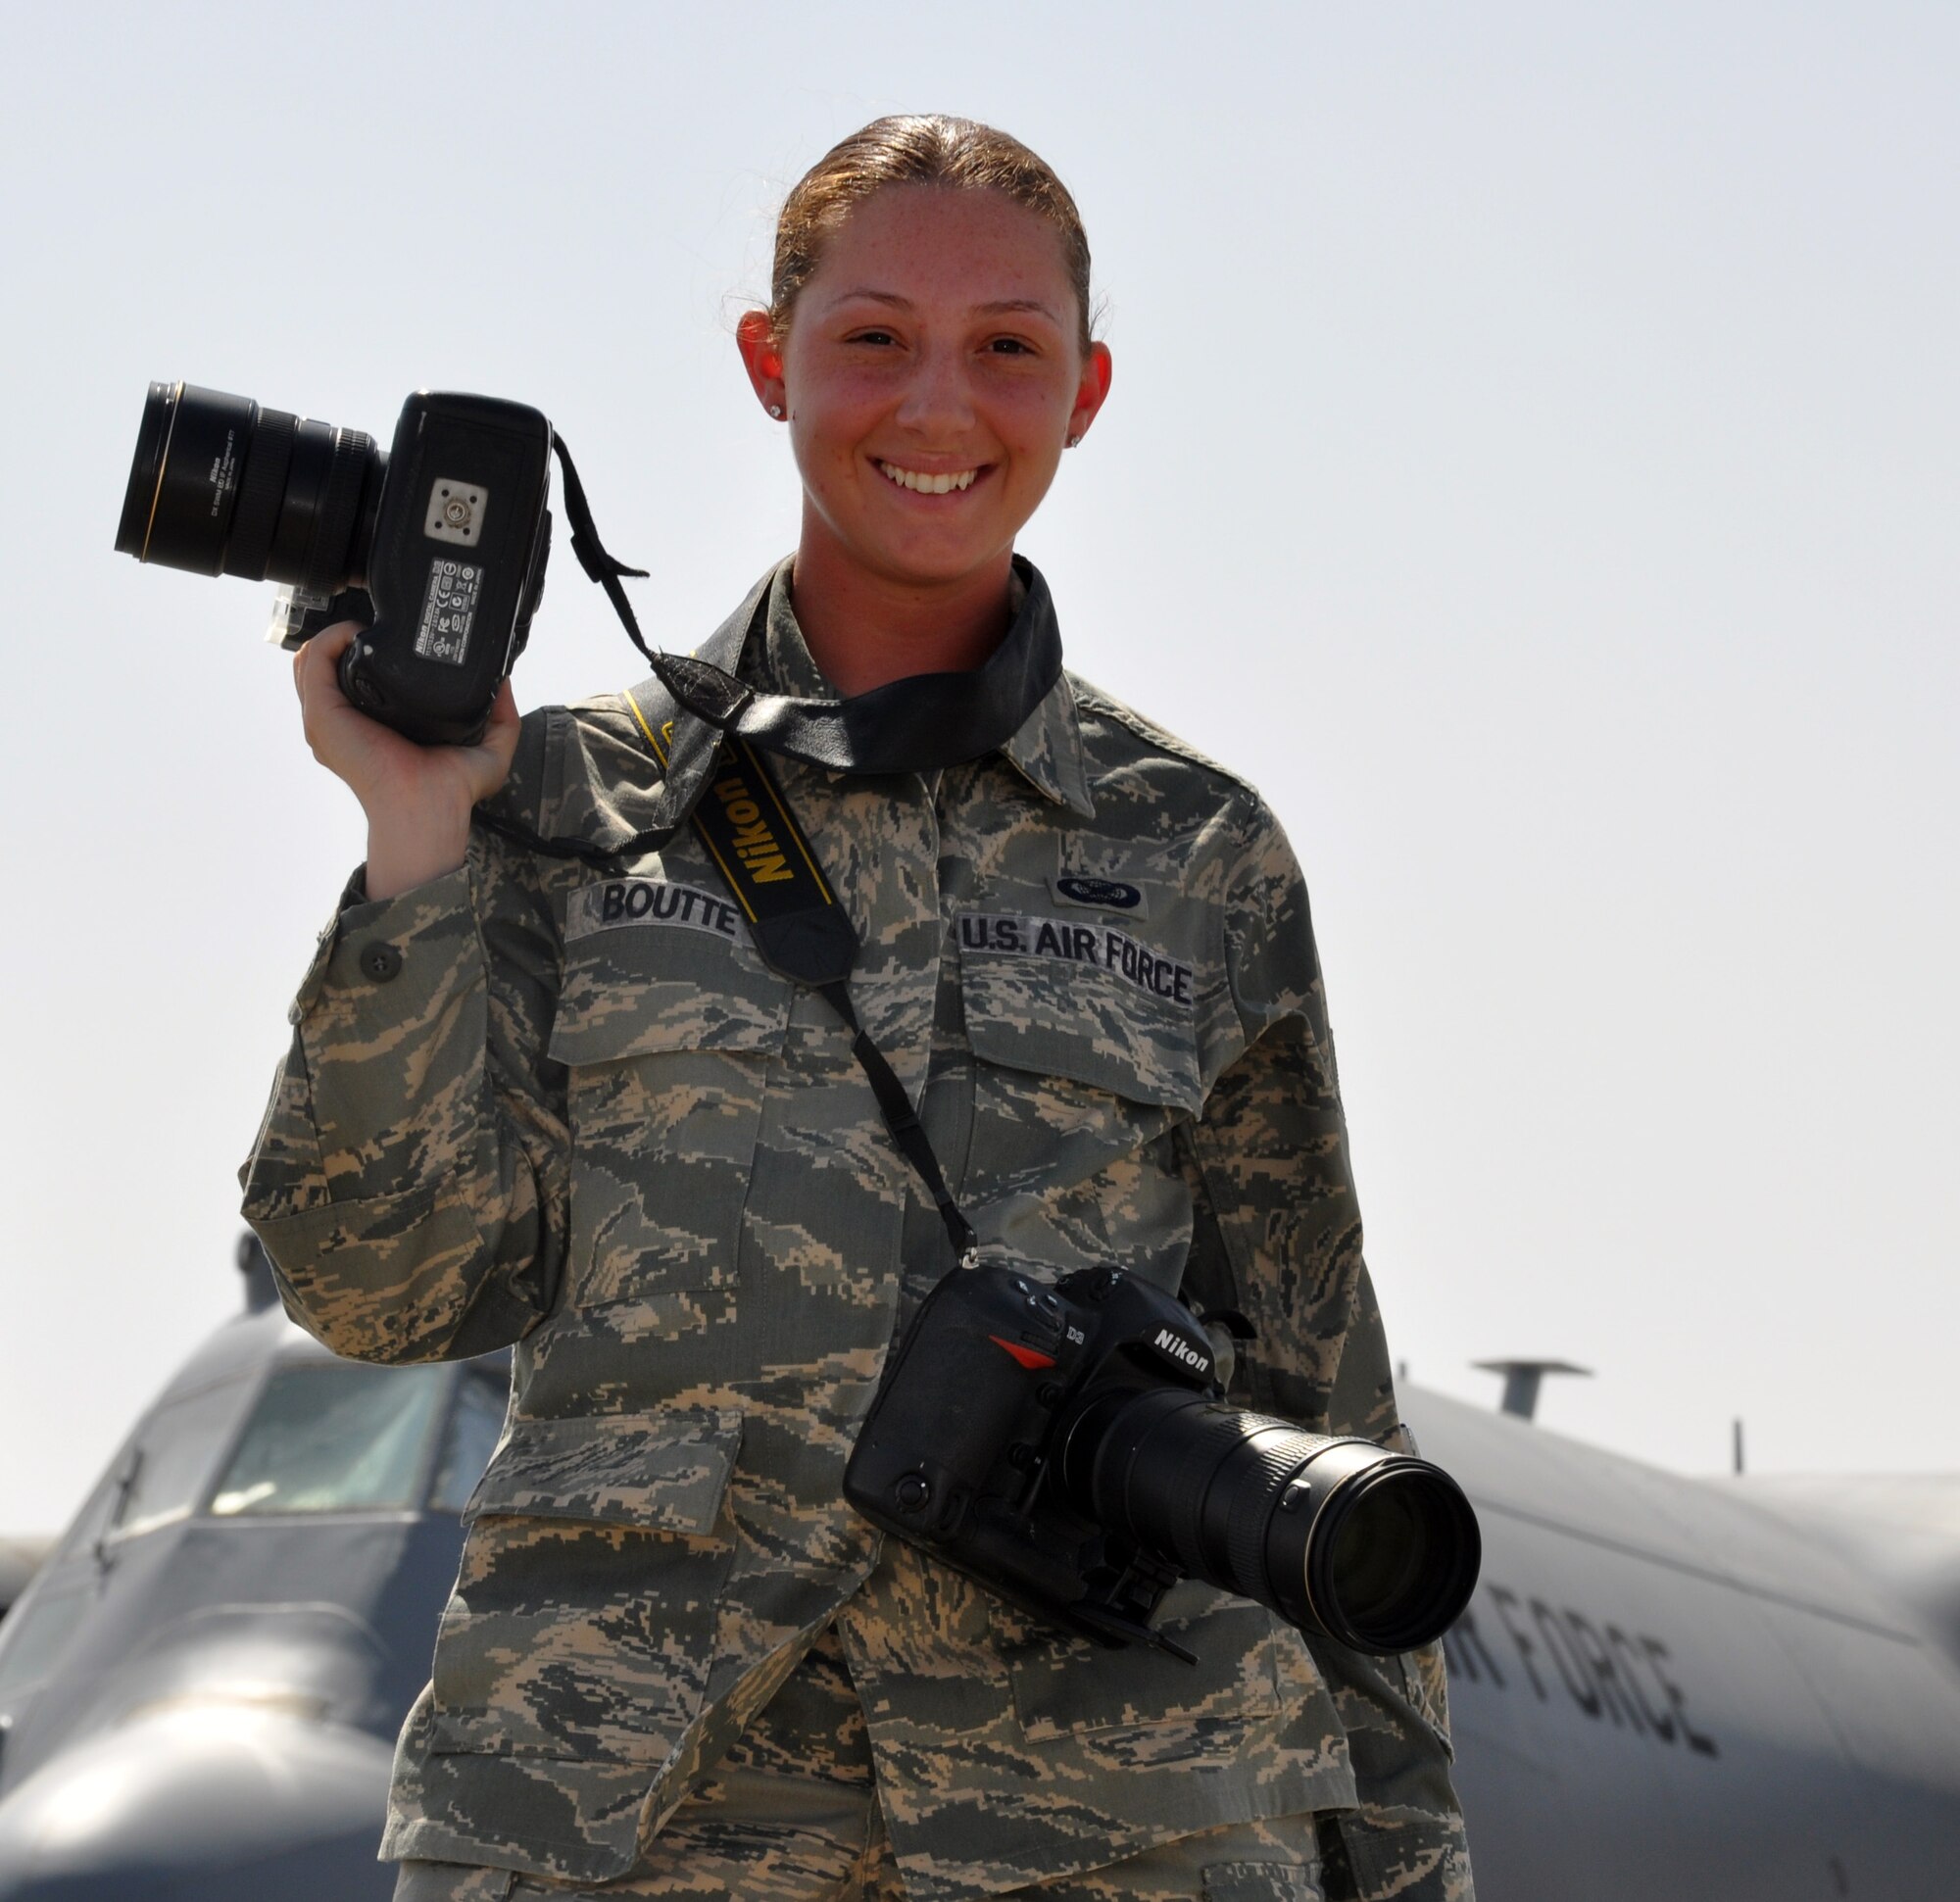 Staff Sgt. Alexandra Boutte, 386th Air Expeditionary Wing Public Affairs, prepares to photograph activity on the flightline. Sergeant Boutte’s job is telling the stories other service members through photography, both stateside and on the frontlines. She is a photojournalist deployed from the 509th Bomb Wing Public Affairs office. (U.S. Air Force photo/Master Sgt. Kristina Barrett) (RELEASED)